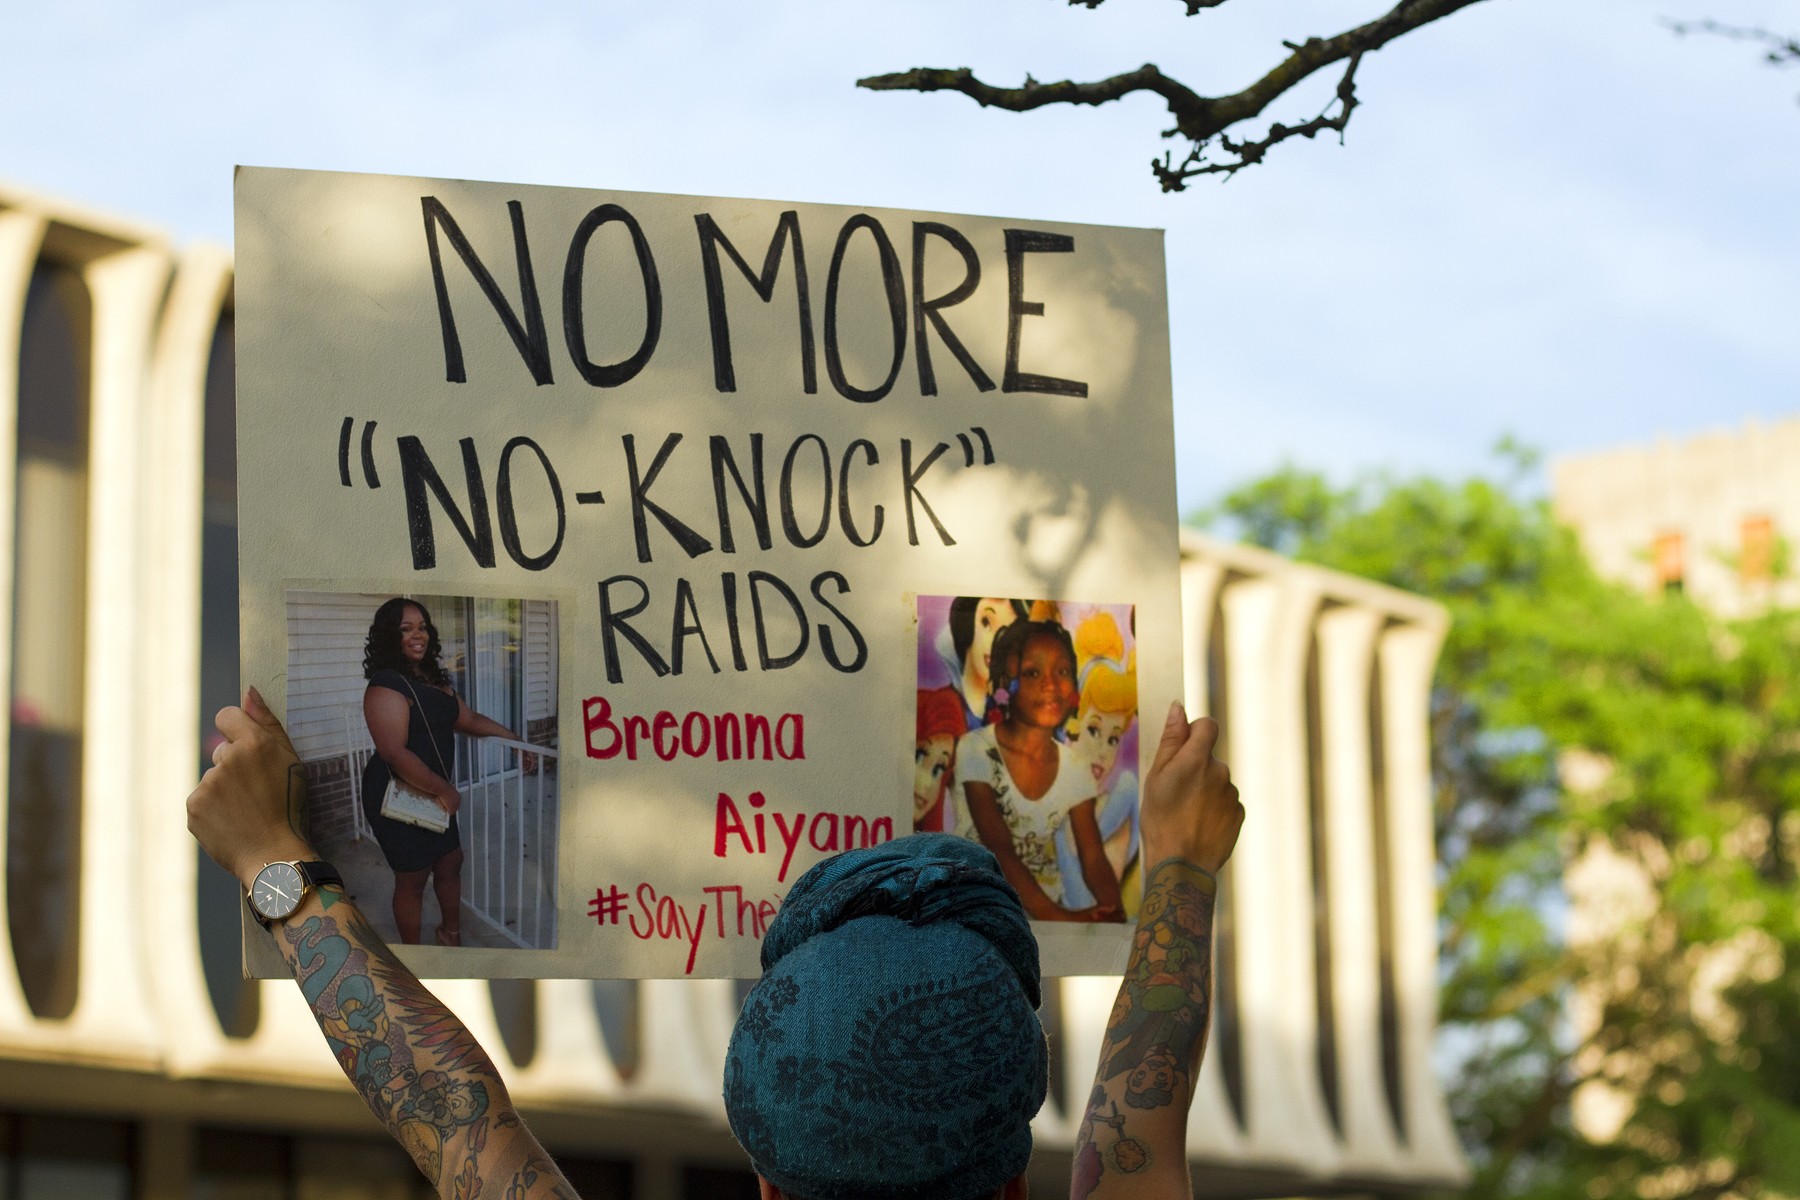 Police chokeholds, no-knock warrants banned by Department of Justice